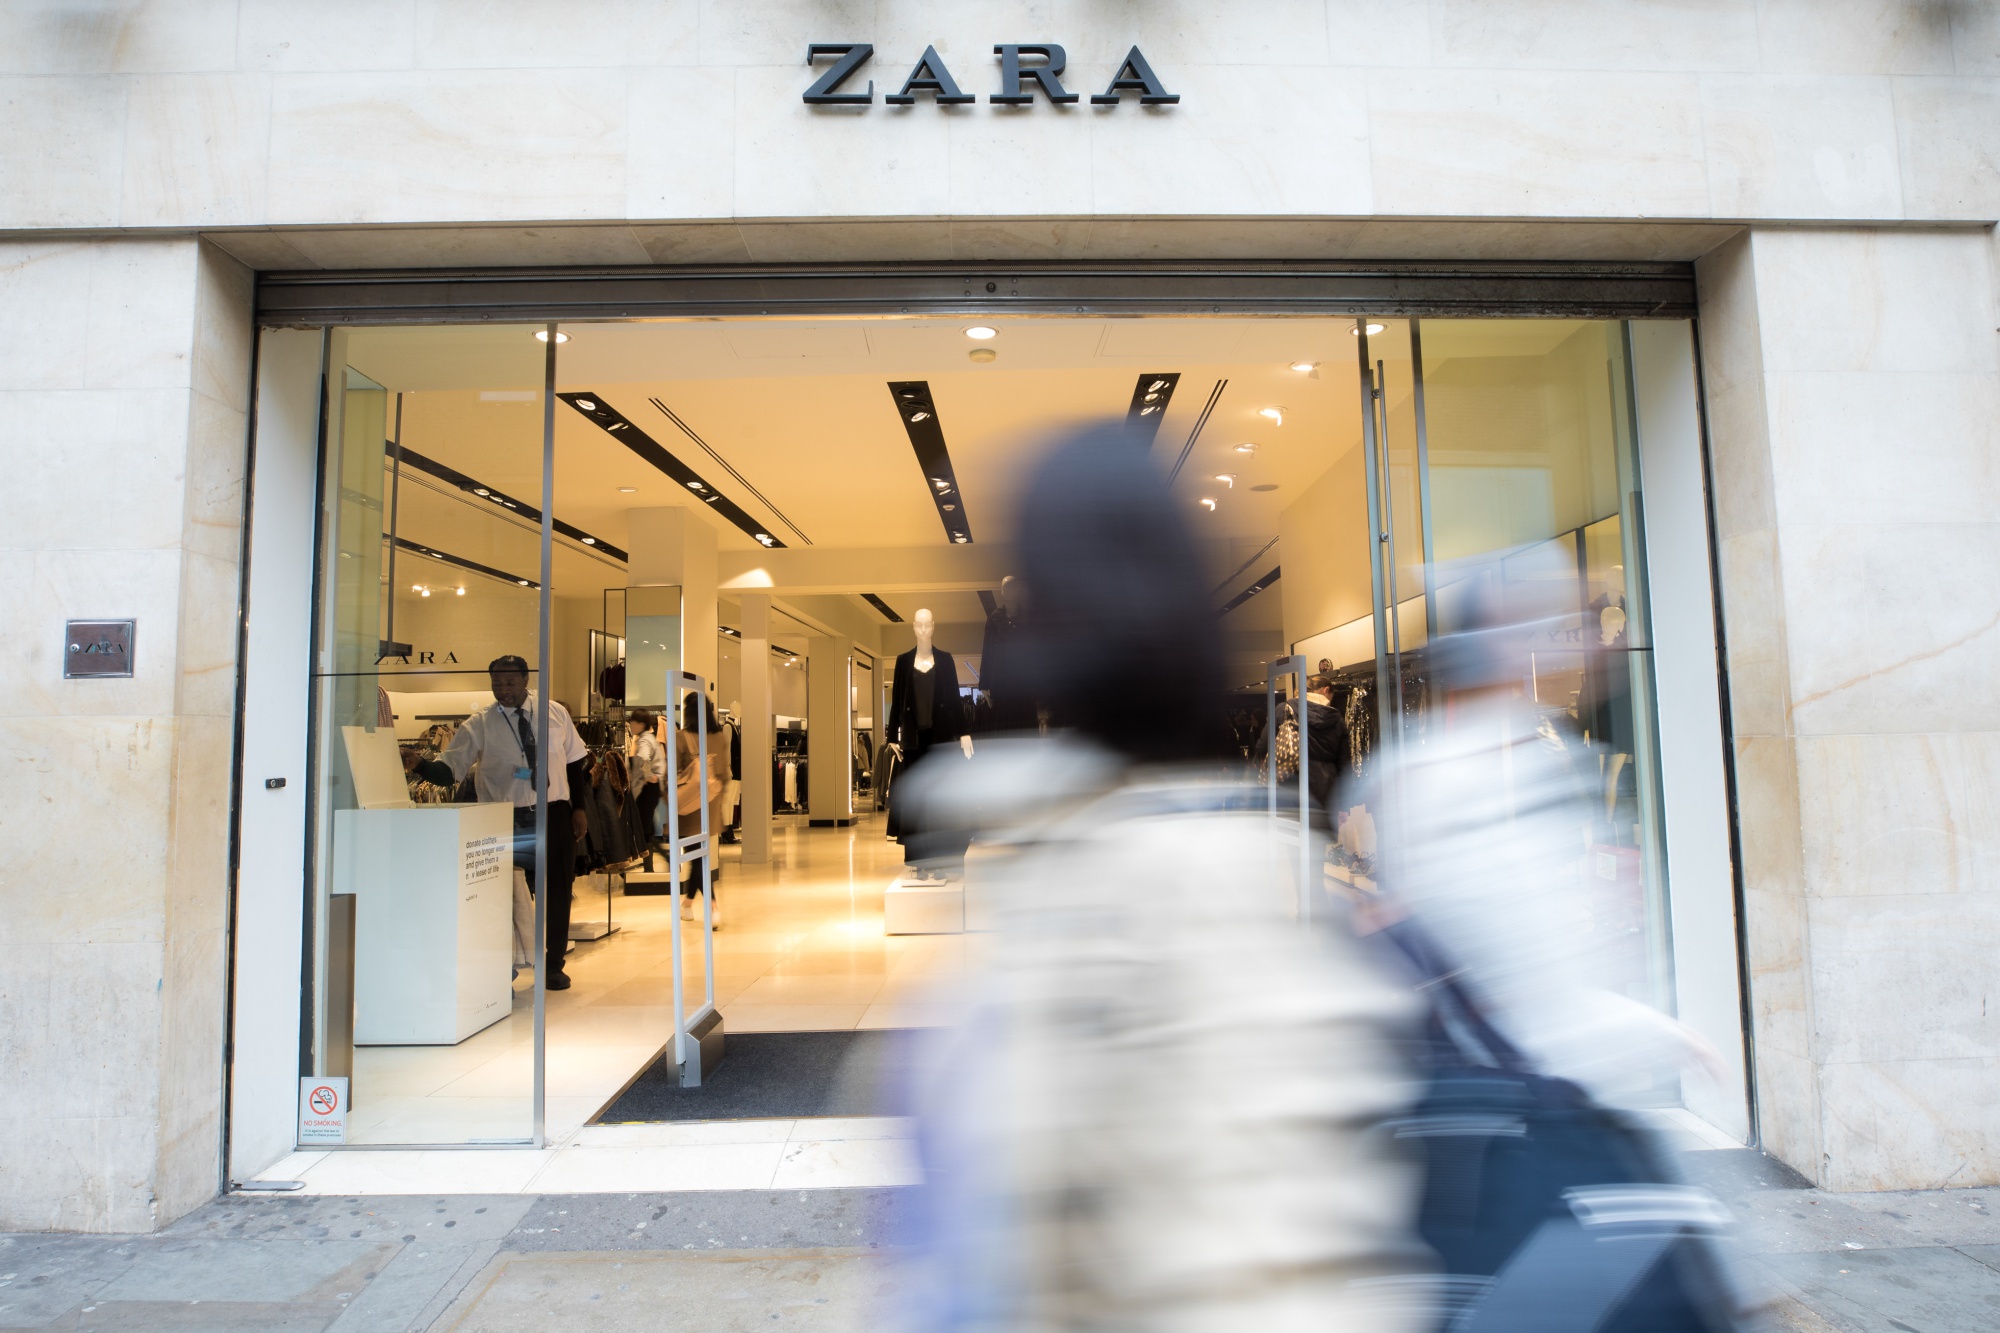 Zara has to show that it can cope with the future.